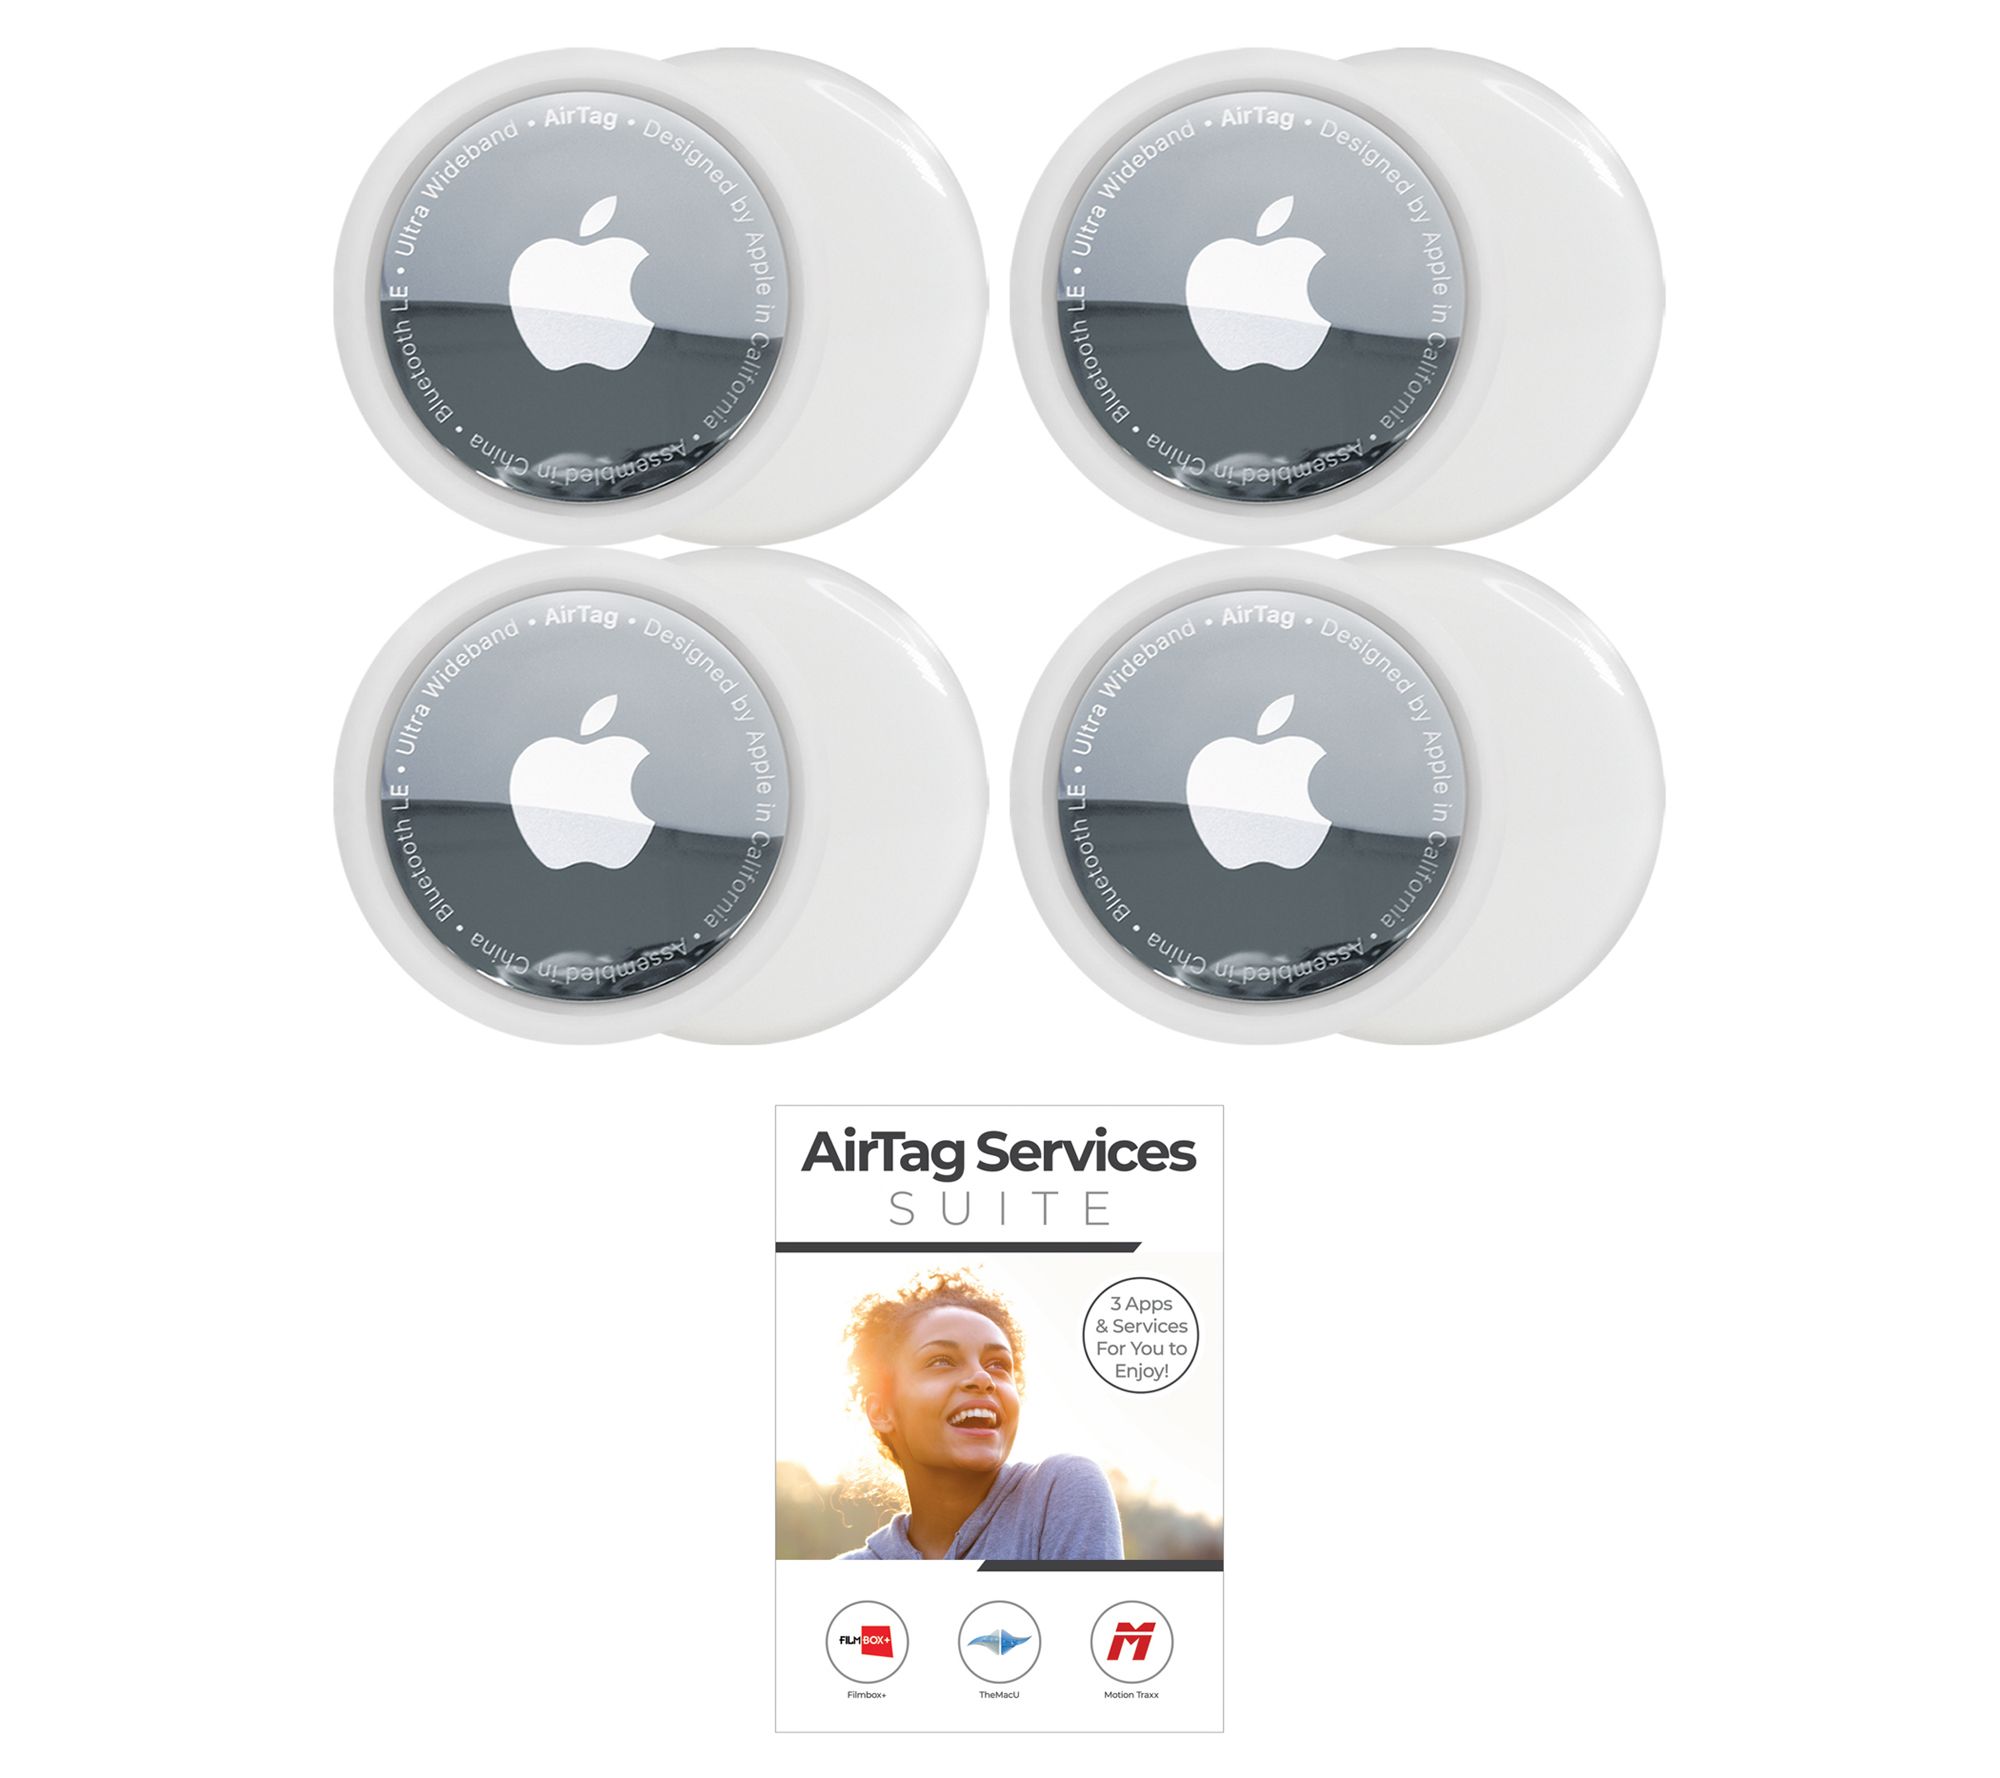 Apple AirTag - The 10 objects or places to put AirTags! 